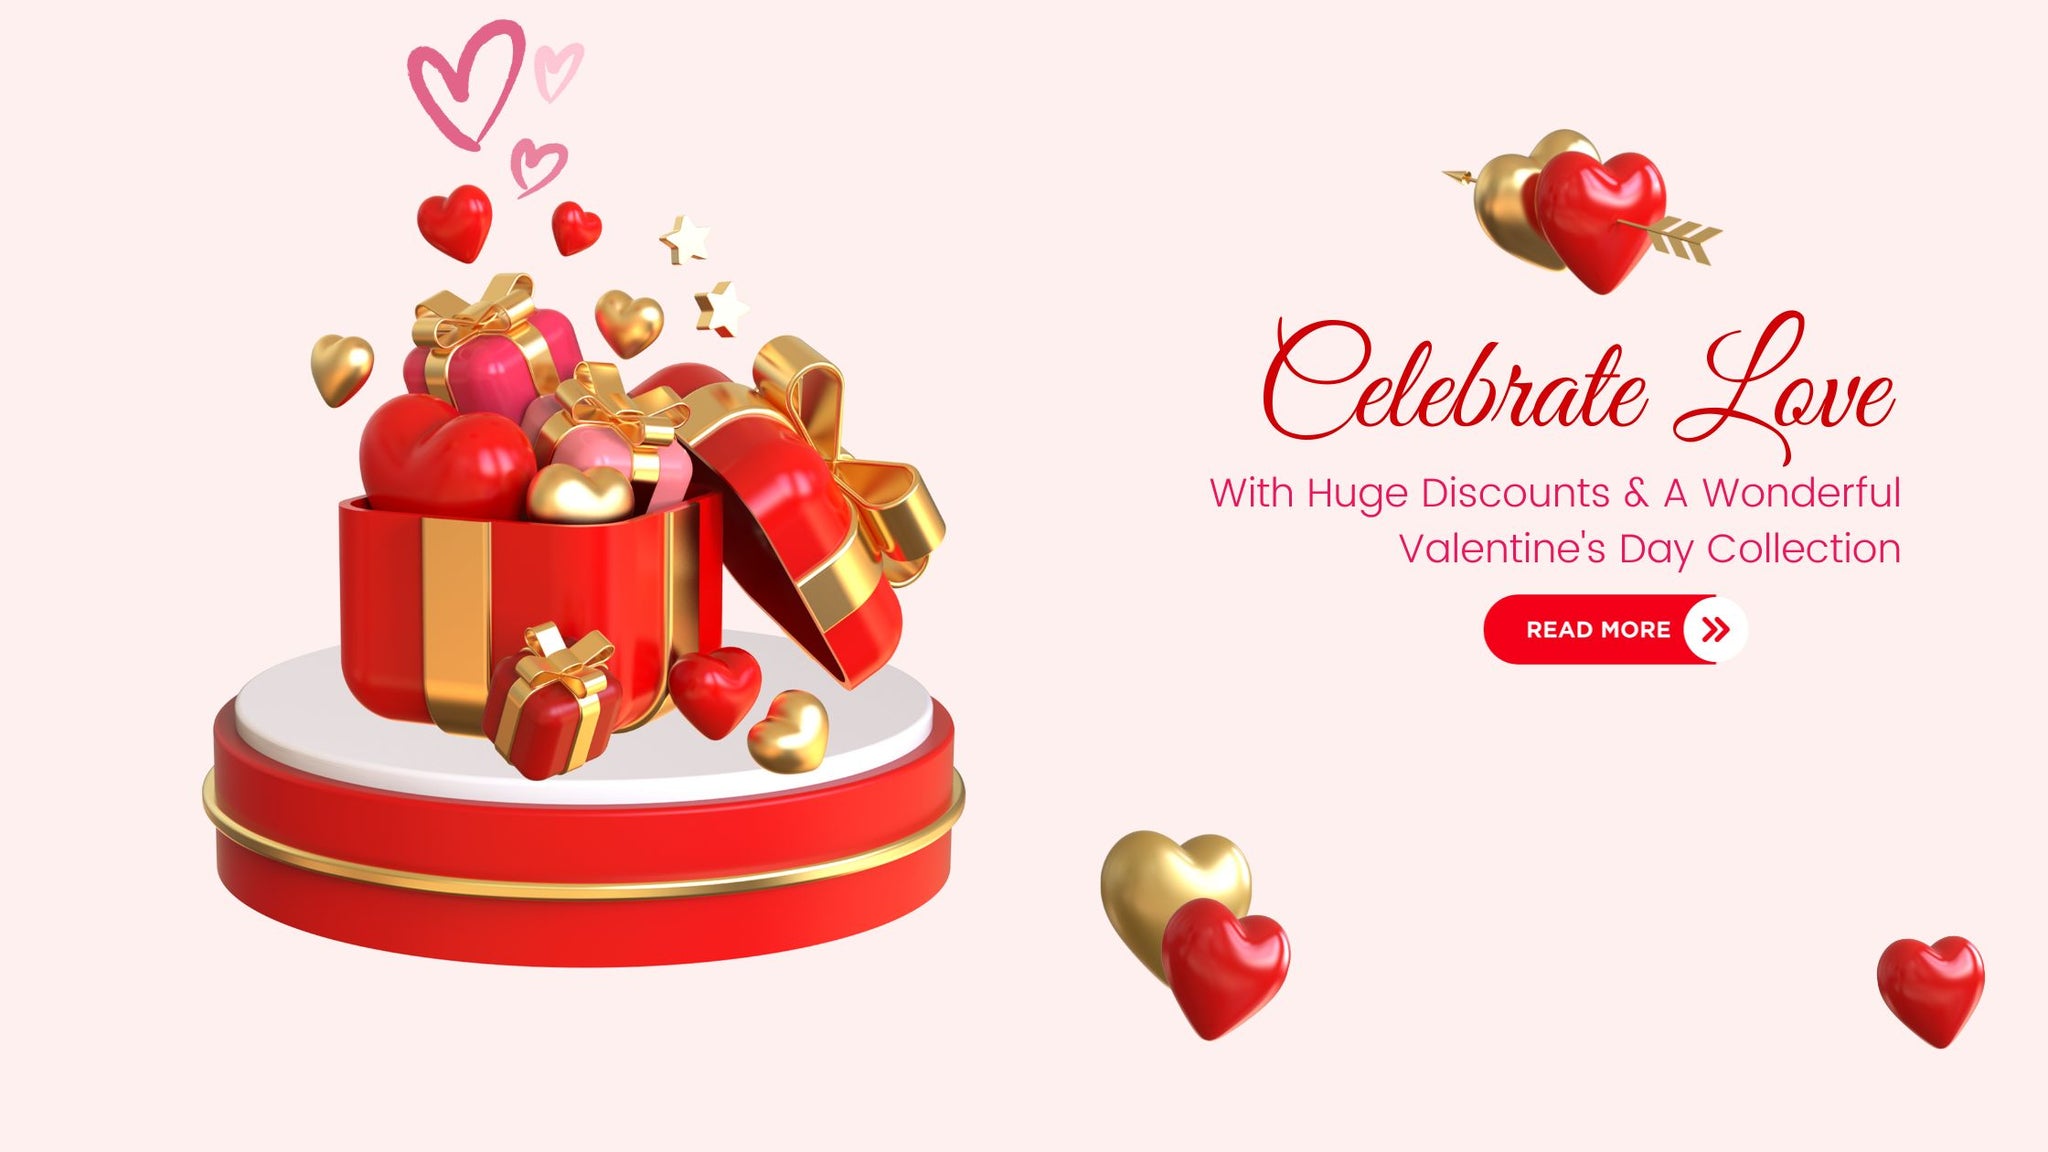 Celebrate Love With Huge Discounts & A Wonderful Valentine's Day Collection